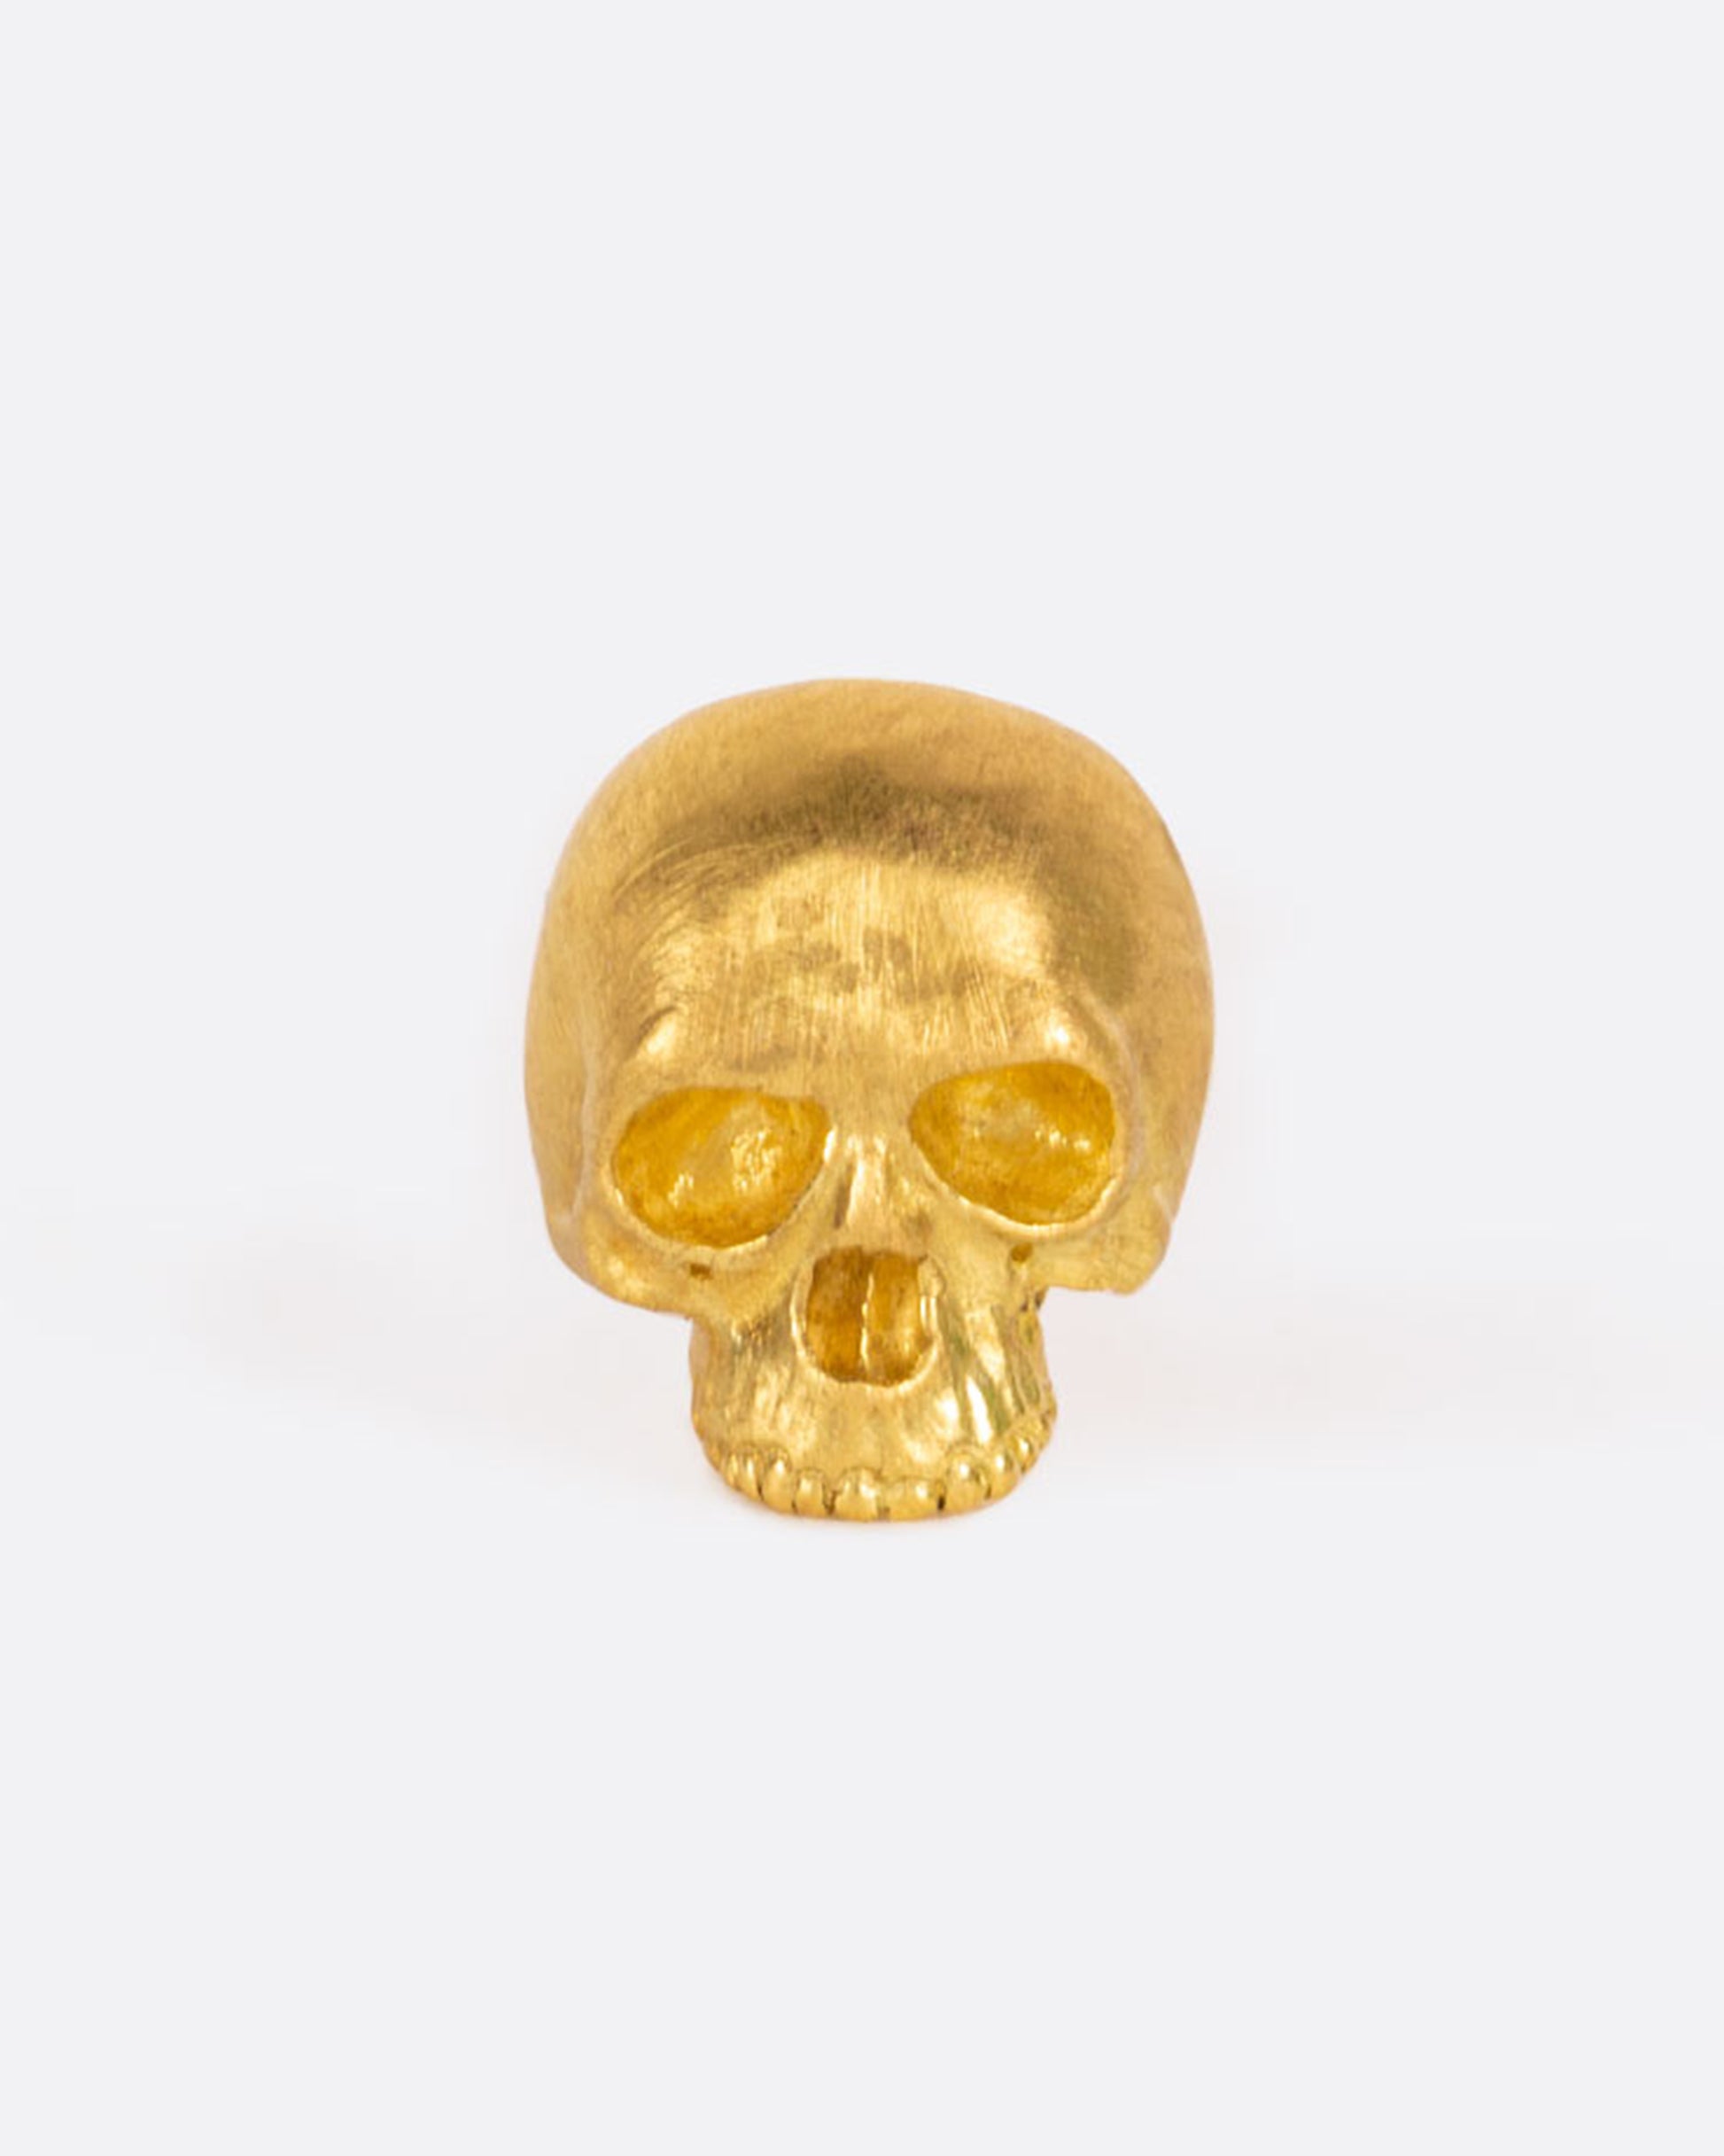 A tiny solid yellow gold skull stud, carved to anatomical perfection by Anthony Lent.